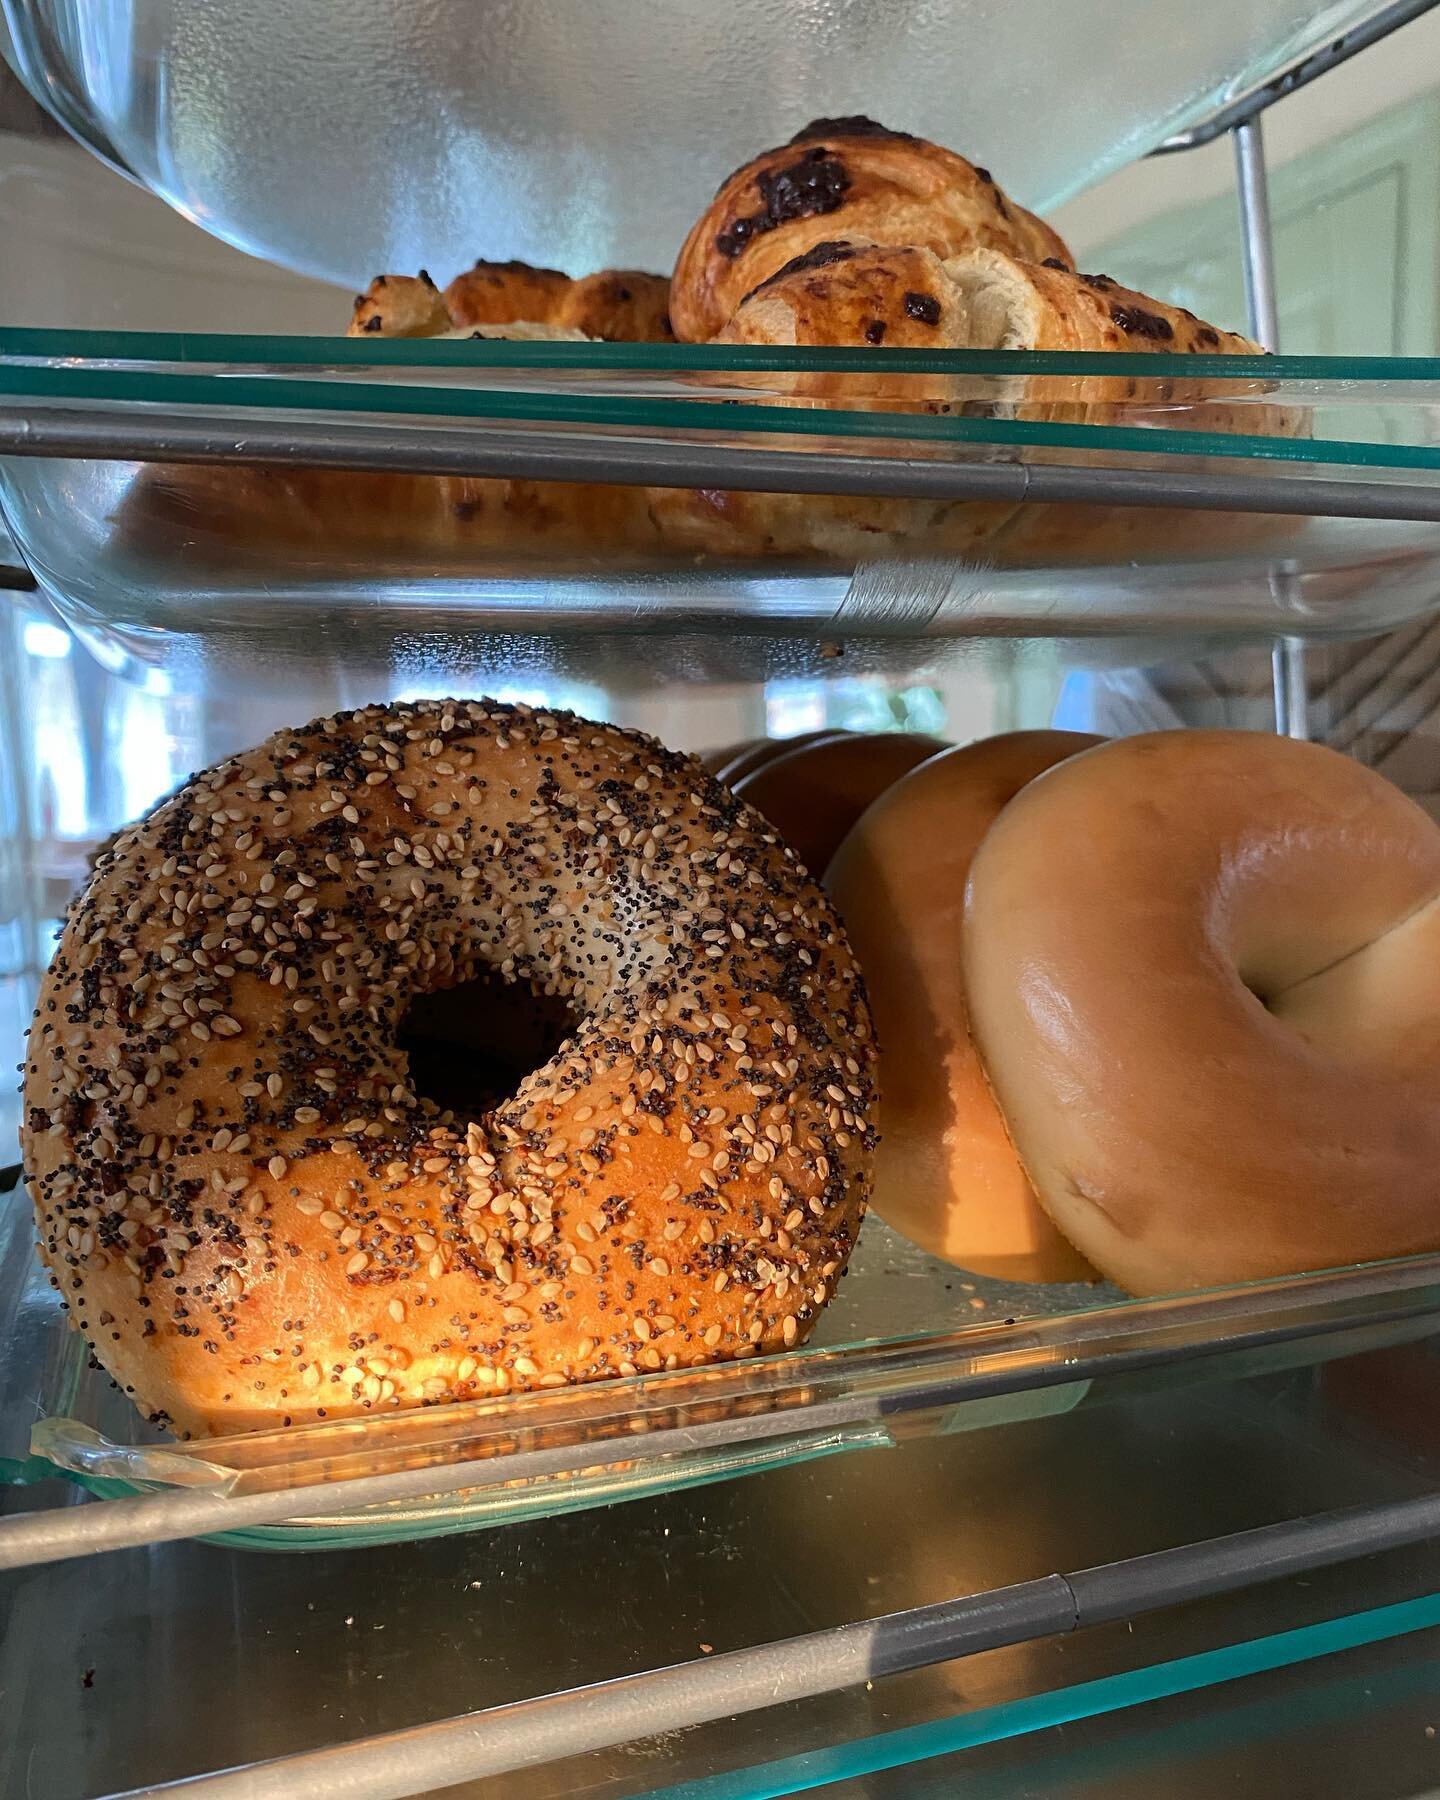 It&rsquo;s a beautiful day for some carbs! Come on in and we&rsquo;ll fix you up with something sweet! 🥯 🥐